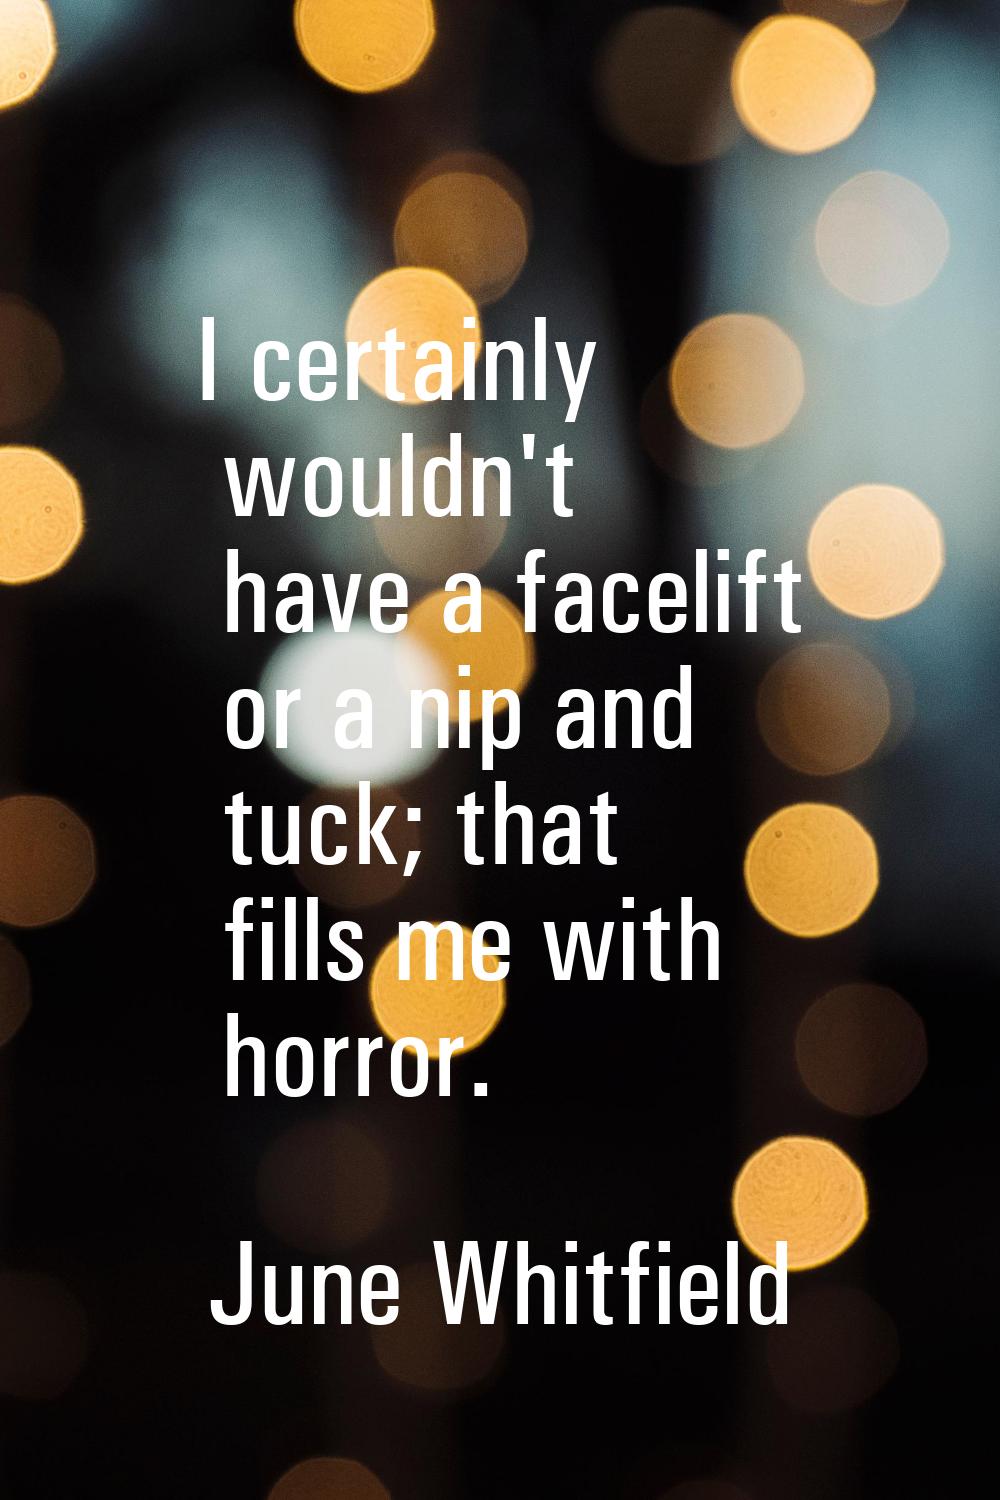 I certainly wouldn't have a facelift or a nip and tuck; that fills me with horror.